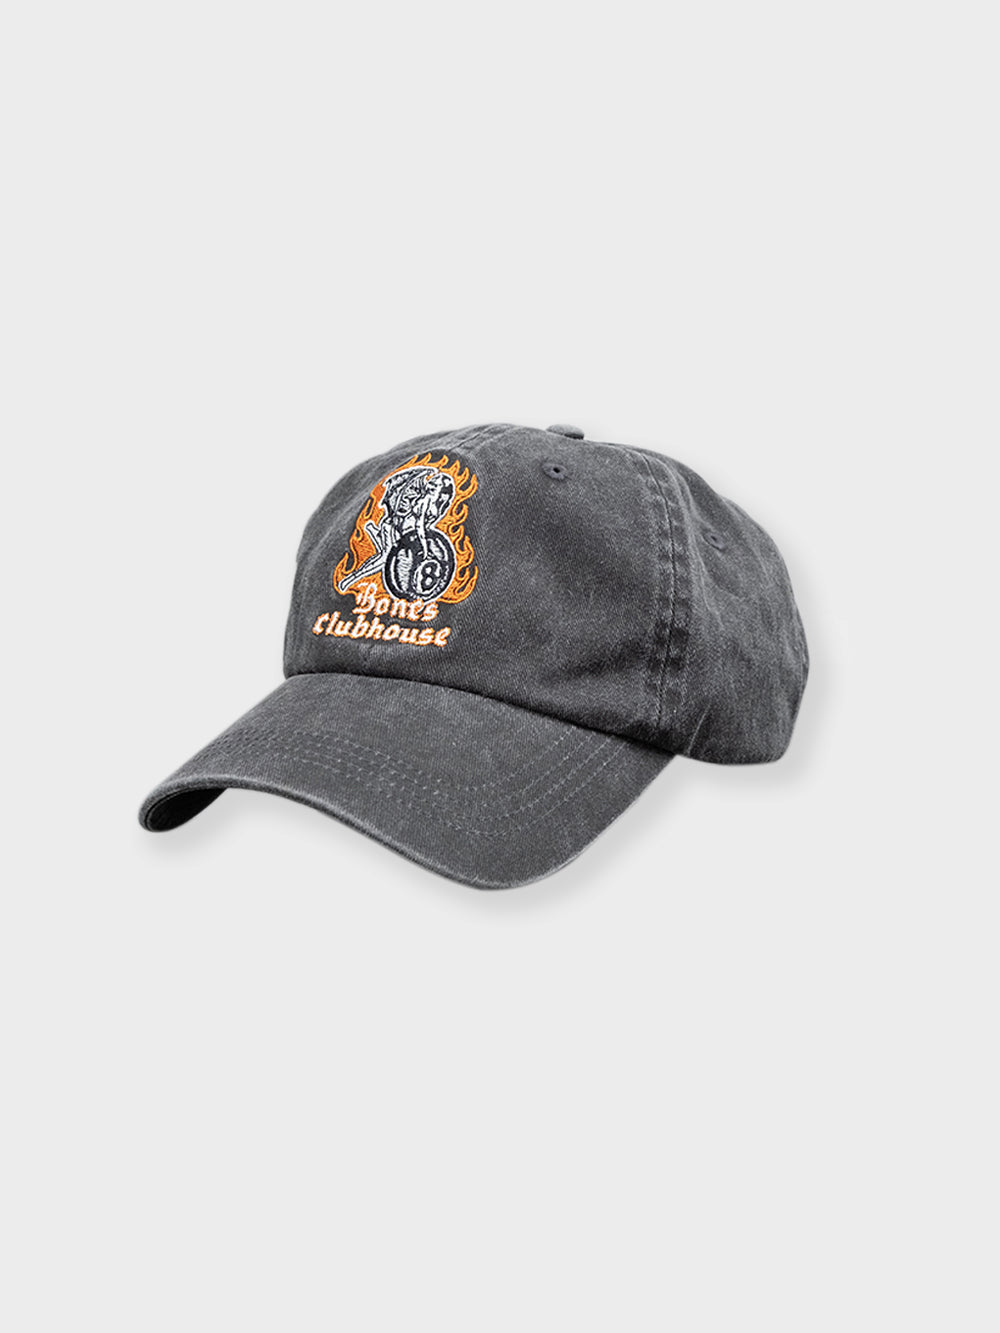 8 Ball Clubhouse Dad Cap - Washed Black